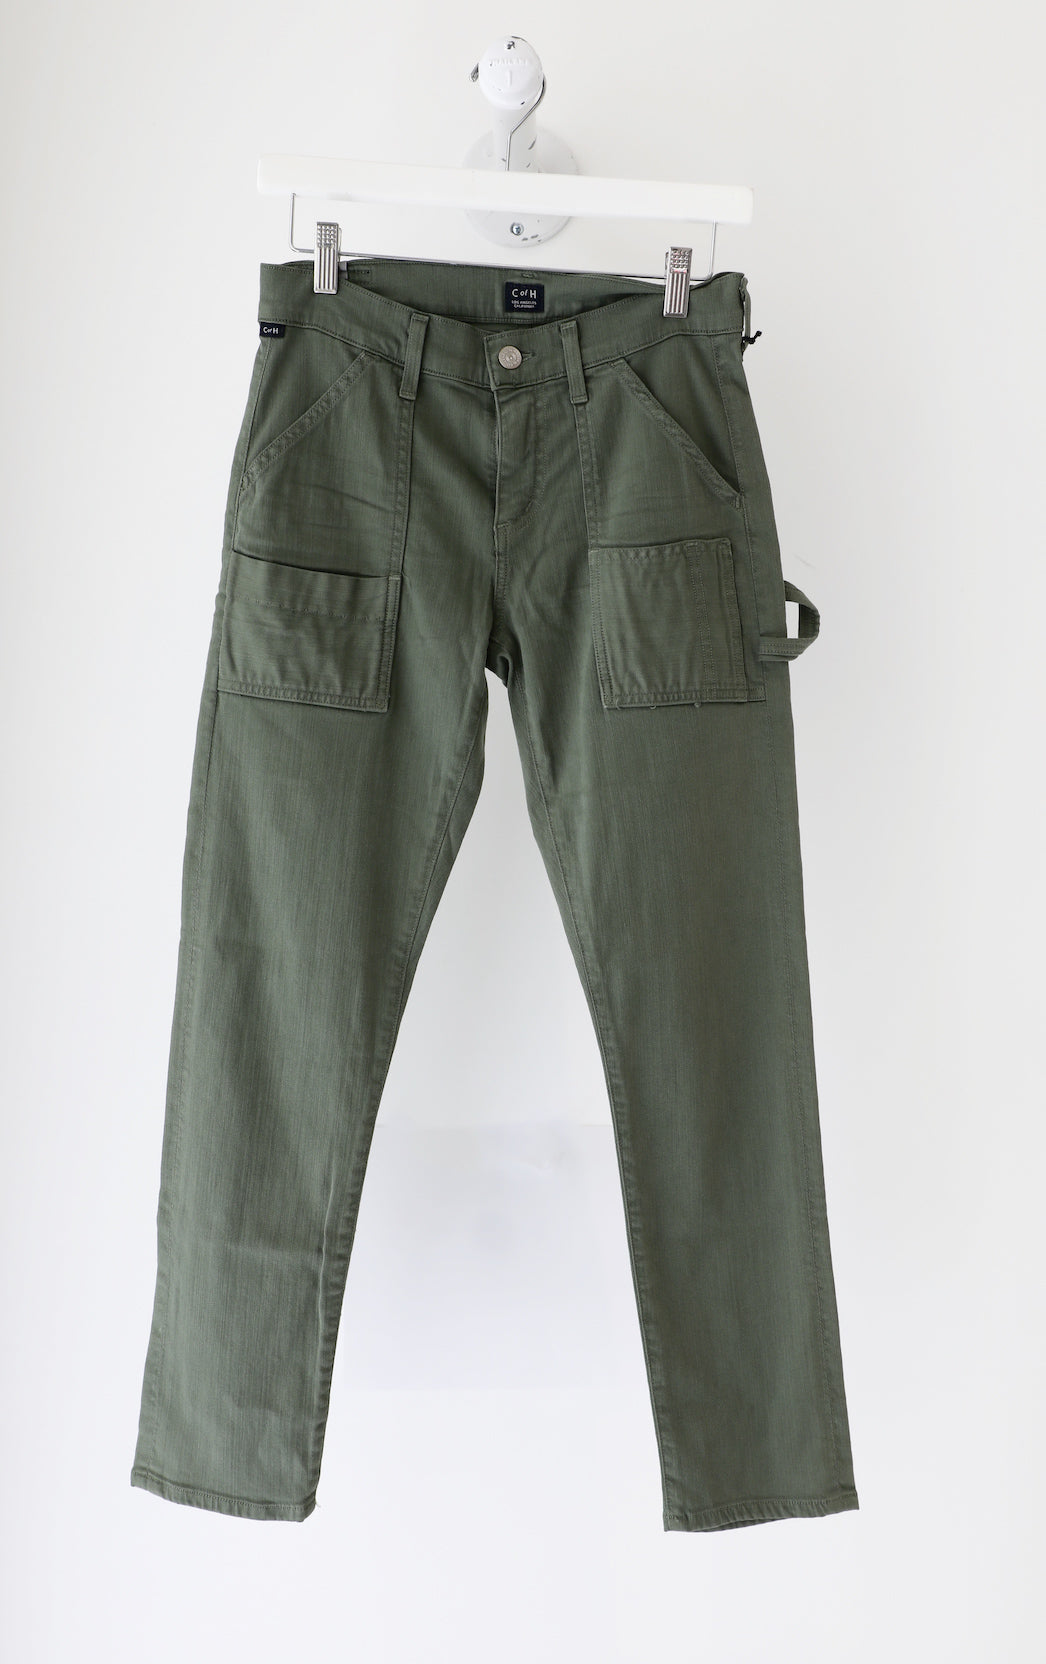 Citizens of Humanity - Twill Leah Cropped Low Rise Loose Pant in Fatigue